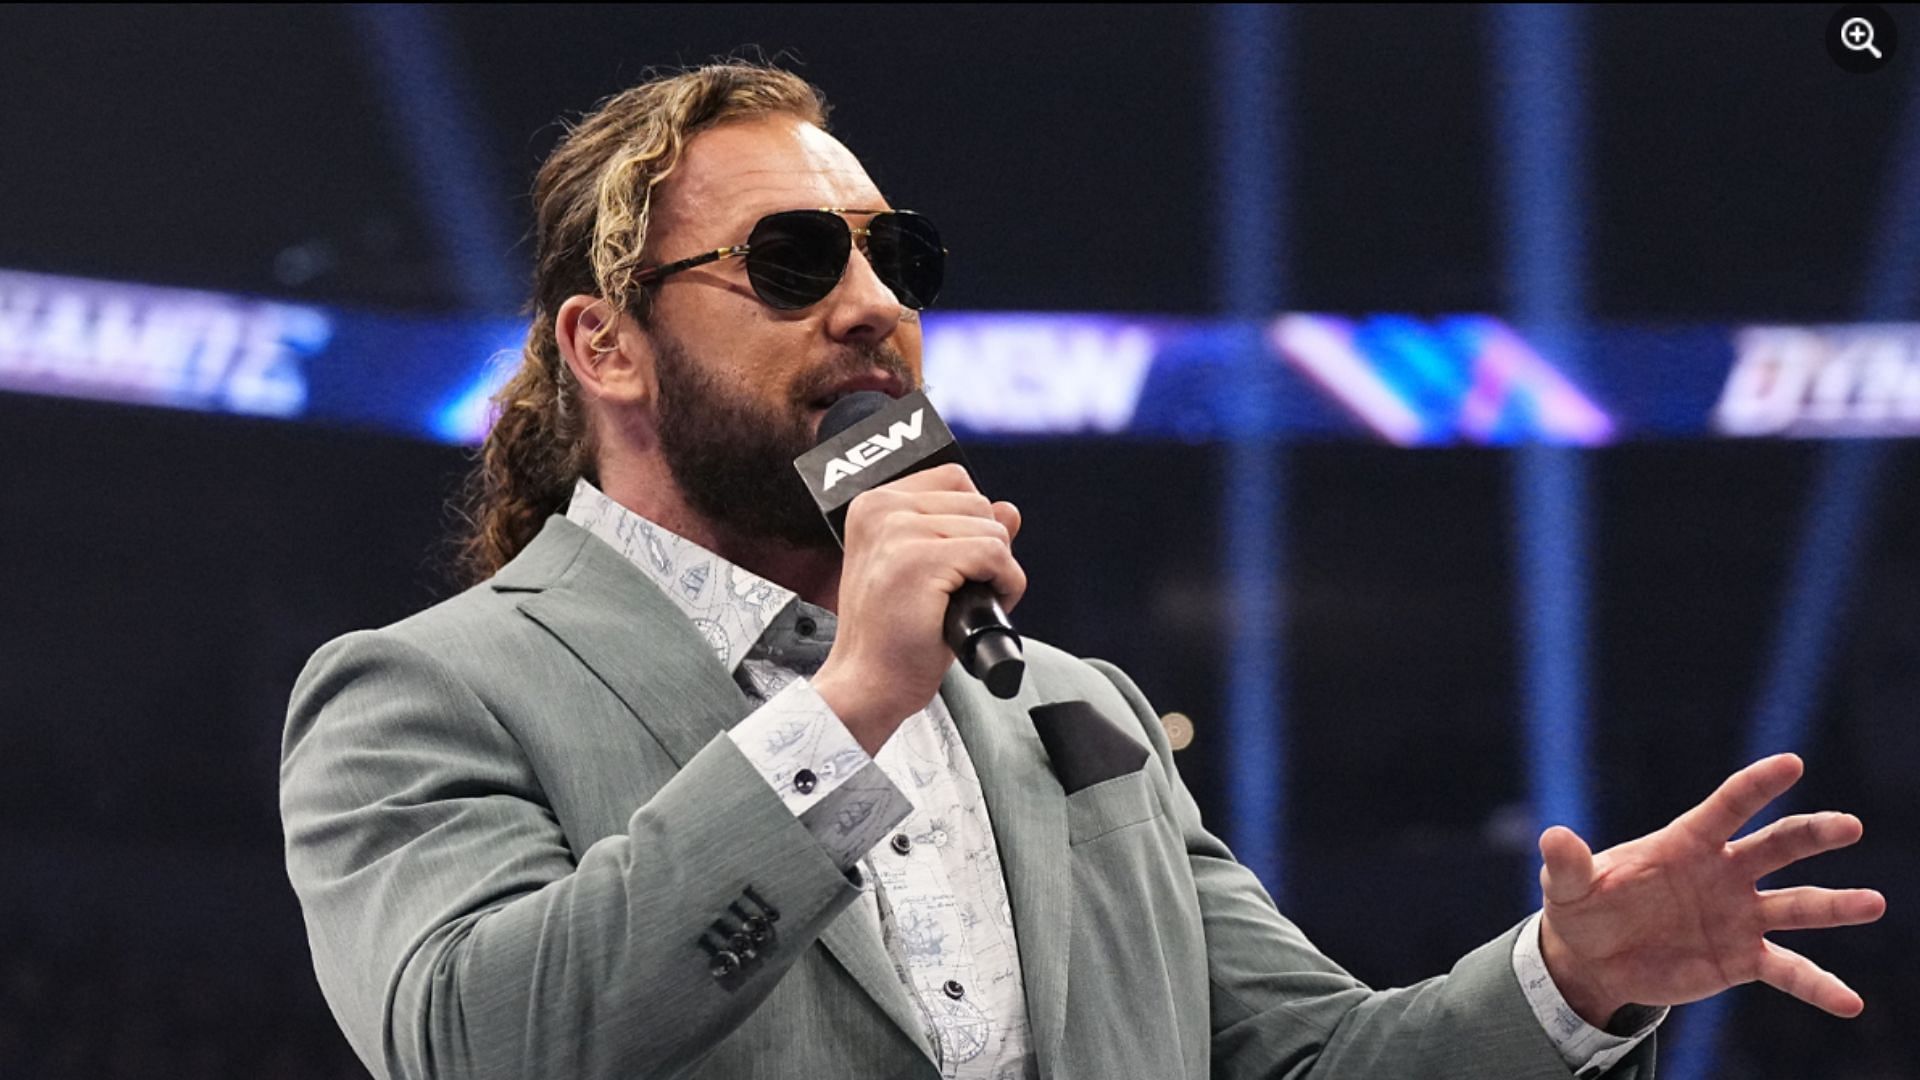 Kenny Omega is a former AEW World Champion [Image Credits: AEW